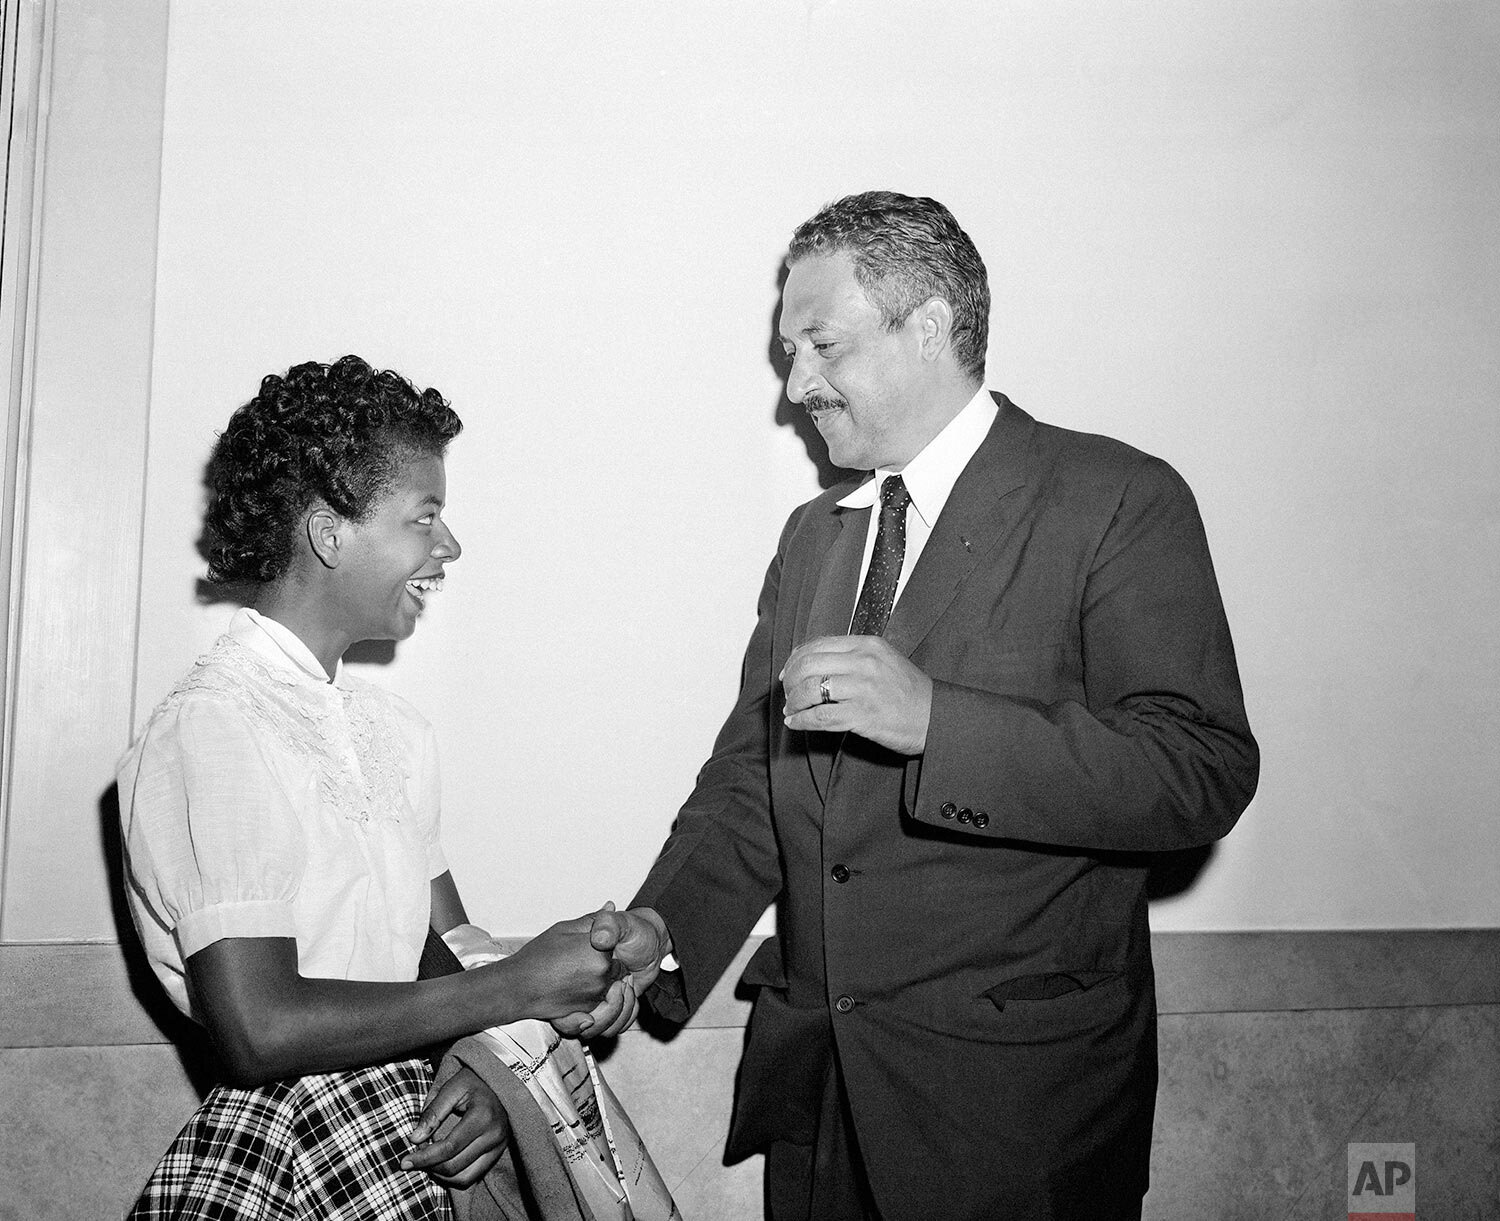  Thurgood Marshall, right, national attorney for the National Association for the Advancement of Colored People (NAACP), talks with Elizabeth Echford, 15, in the corridor of U.E. Courthouse at Little Rock, Ark., Sept. 7, 1957, where a hearing on inte